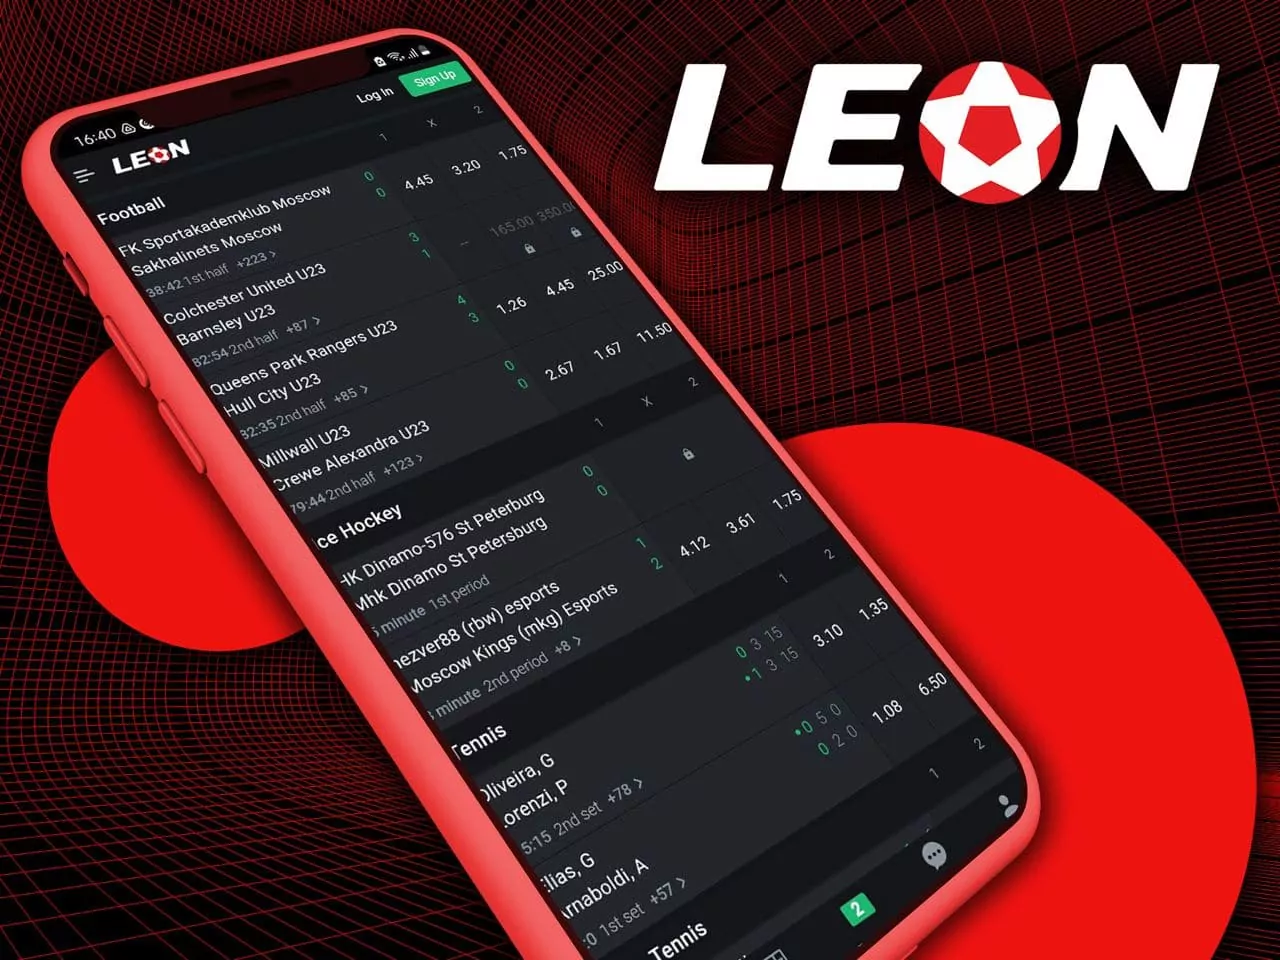 You can place bets in single, express and system in the Leon app.